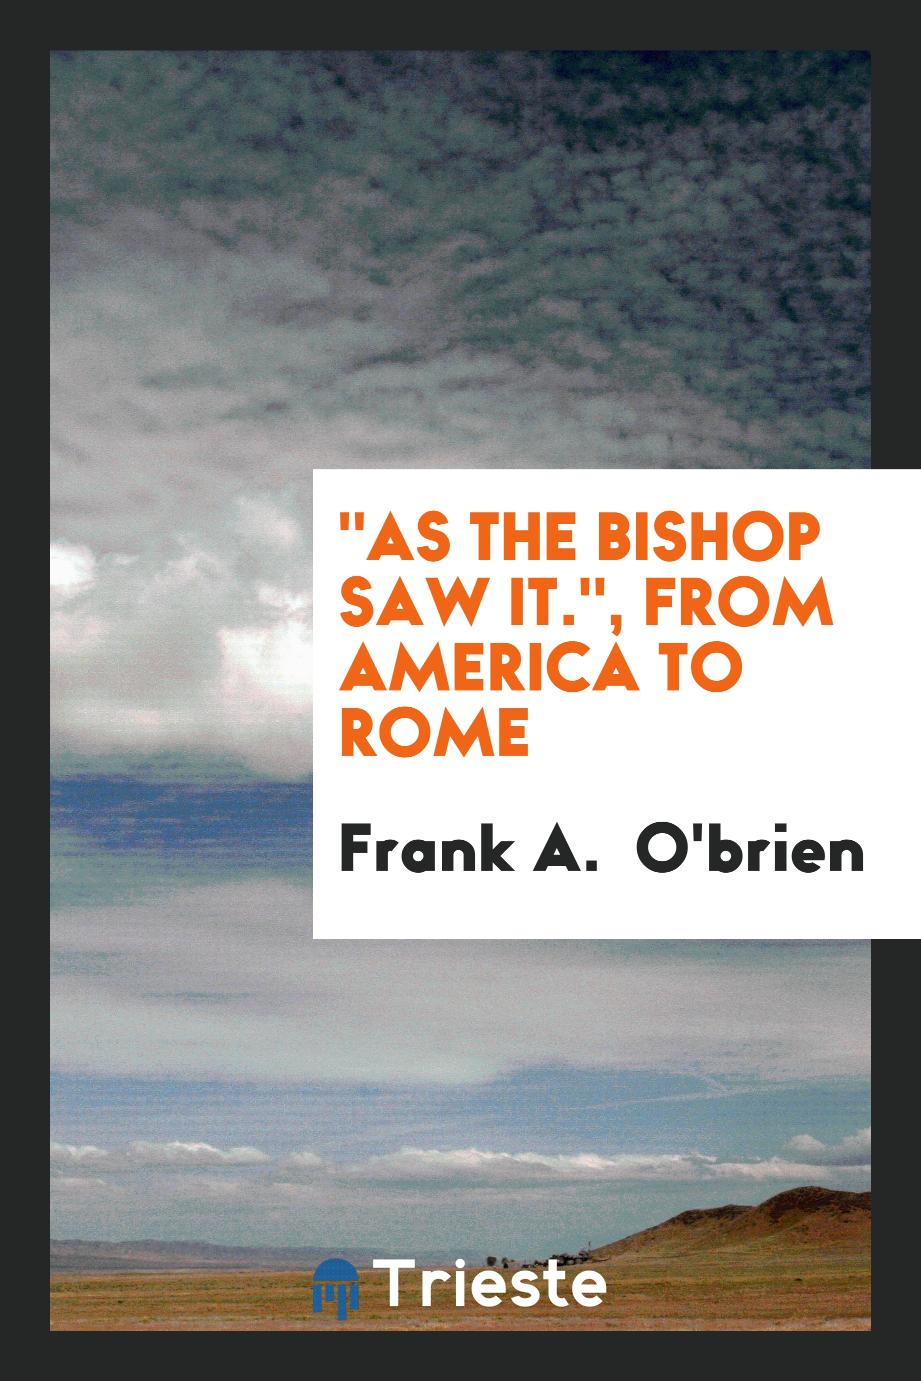 "As the bishop saw it.", from America to Rome